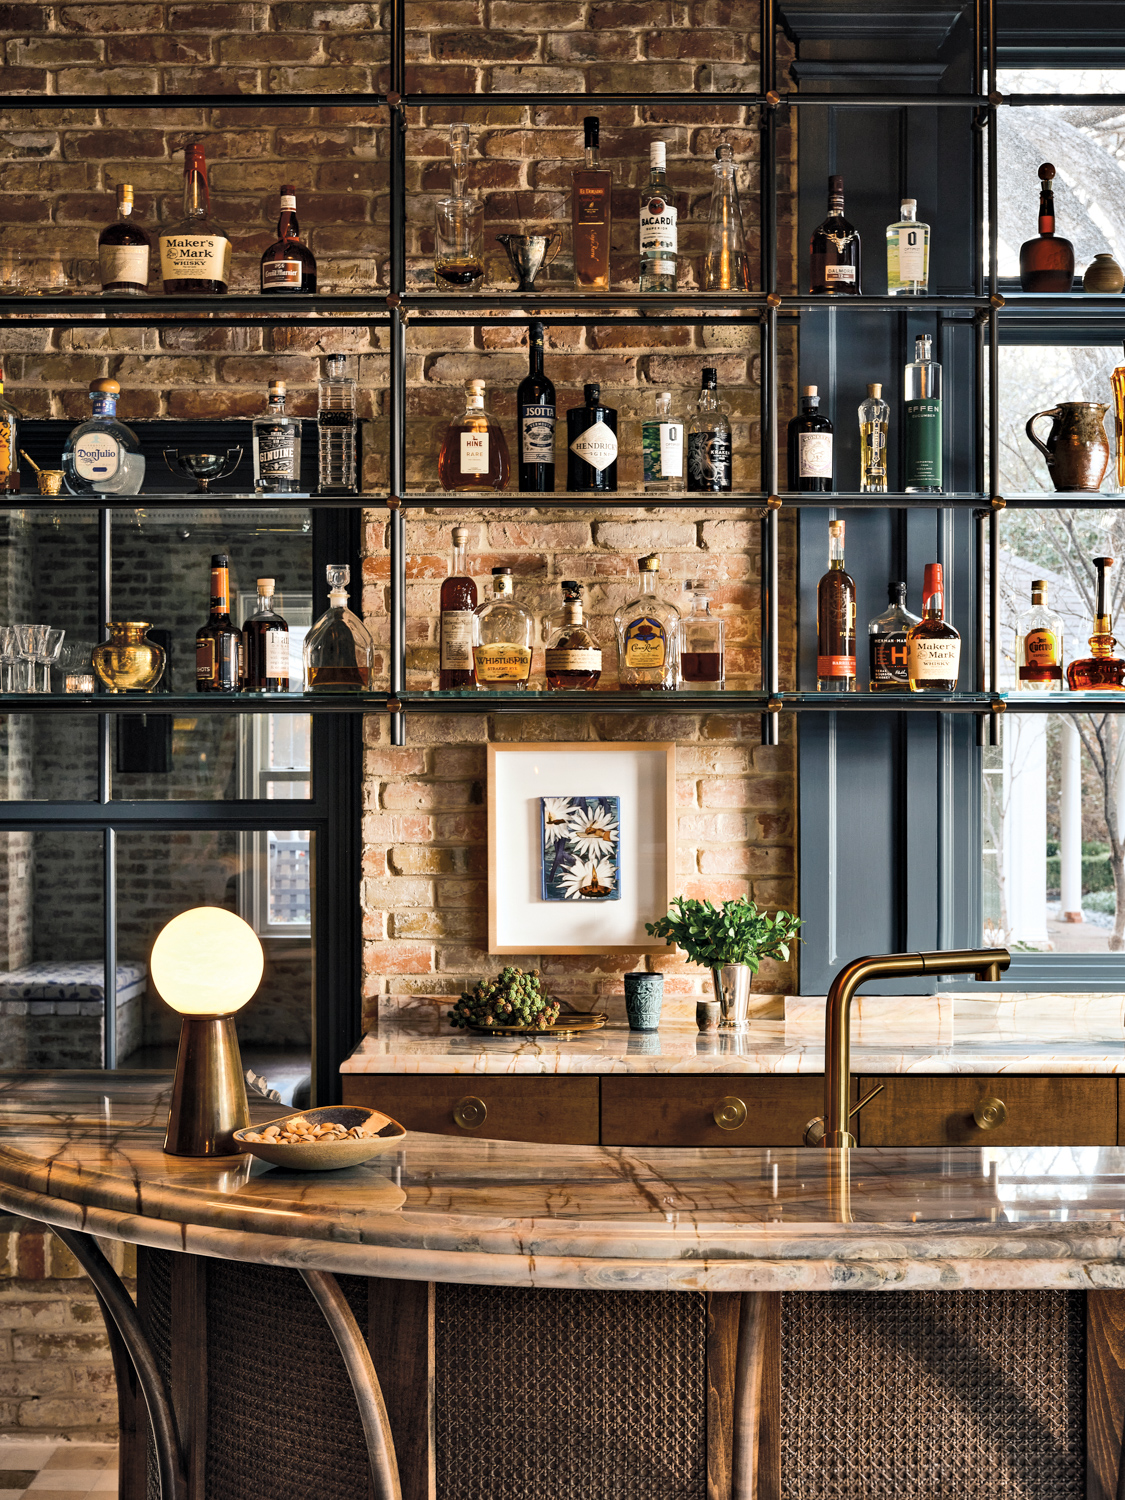 Rounded bar topped with natural stone, behind is exposed brick and exposed shelving displaying spirits.